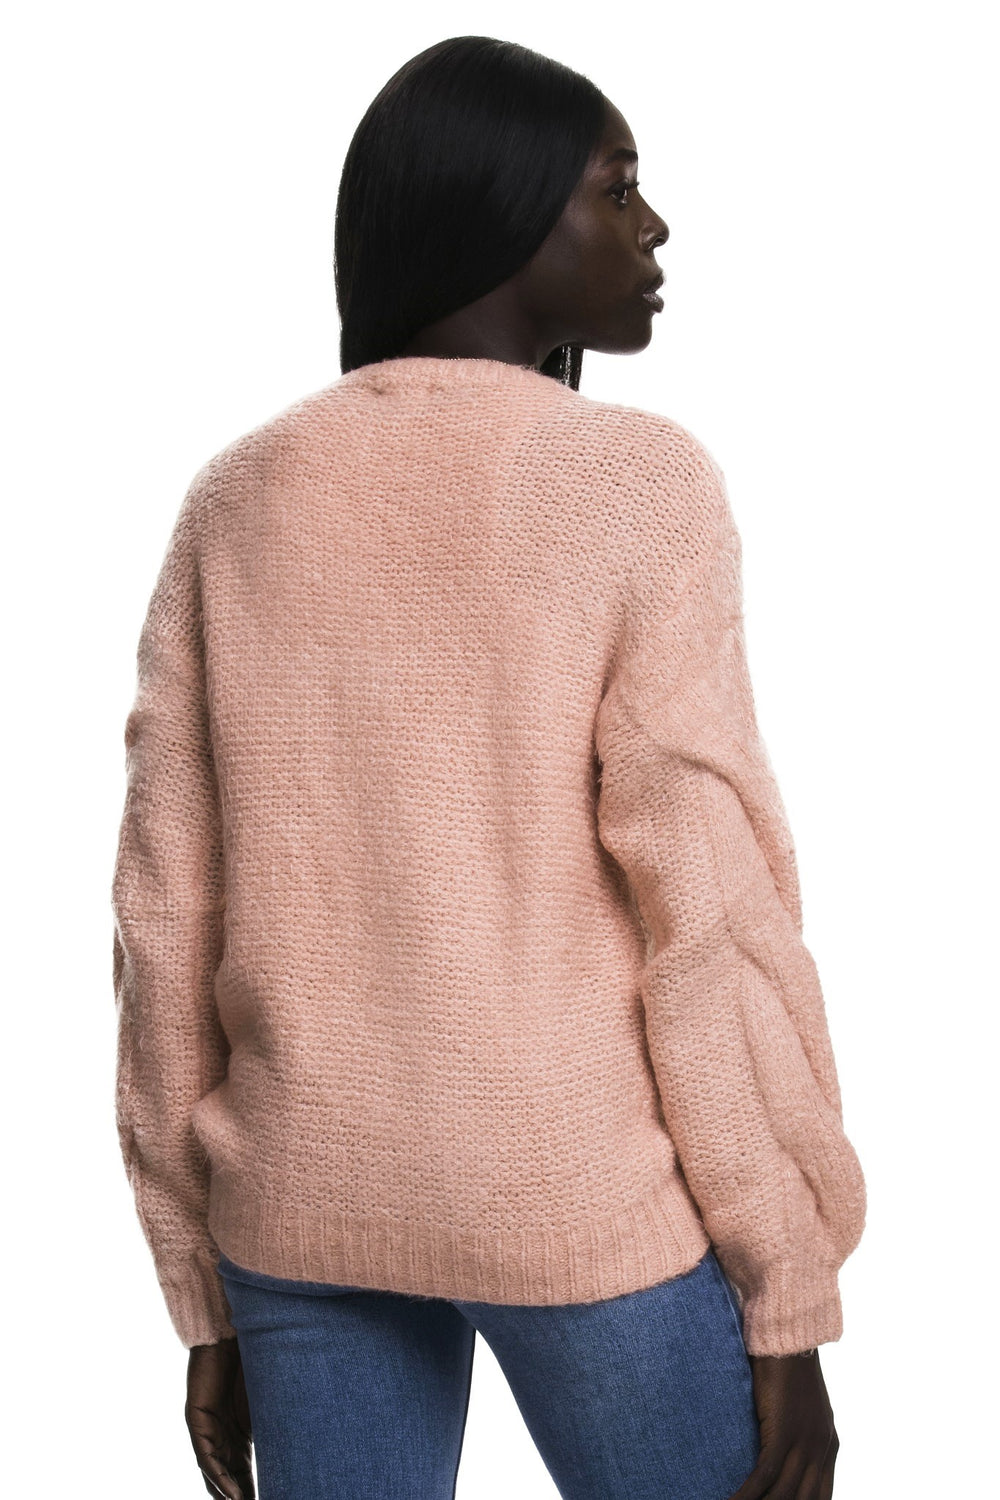 Spiral Twister Peach Cable Sweater - Expressive Collective CO.